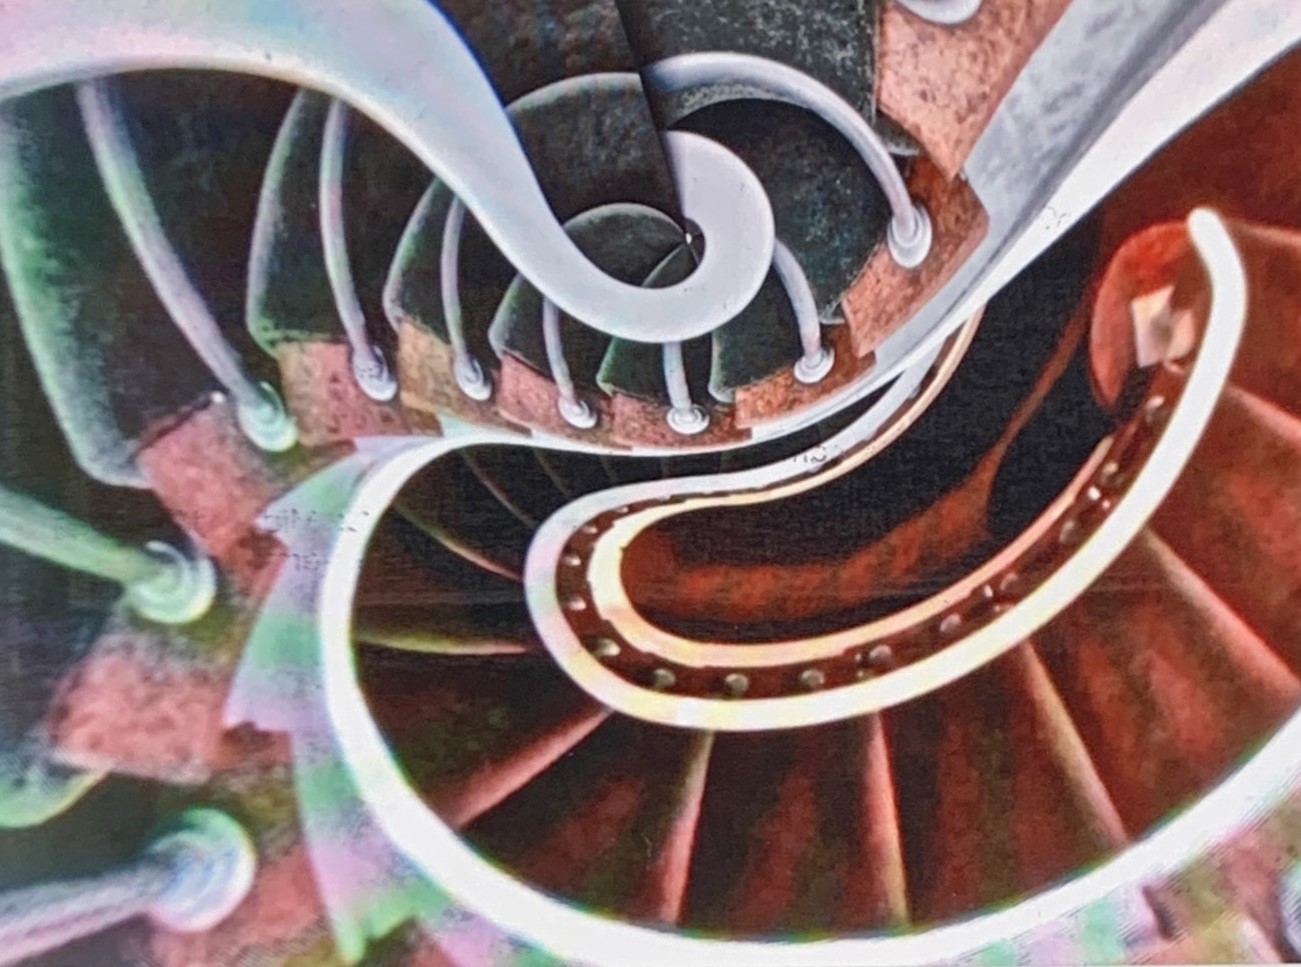 "Twisted Spiral" by David Morrison